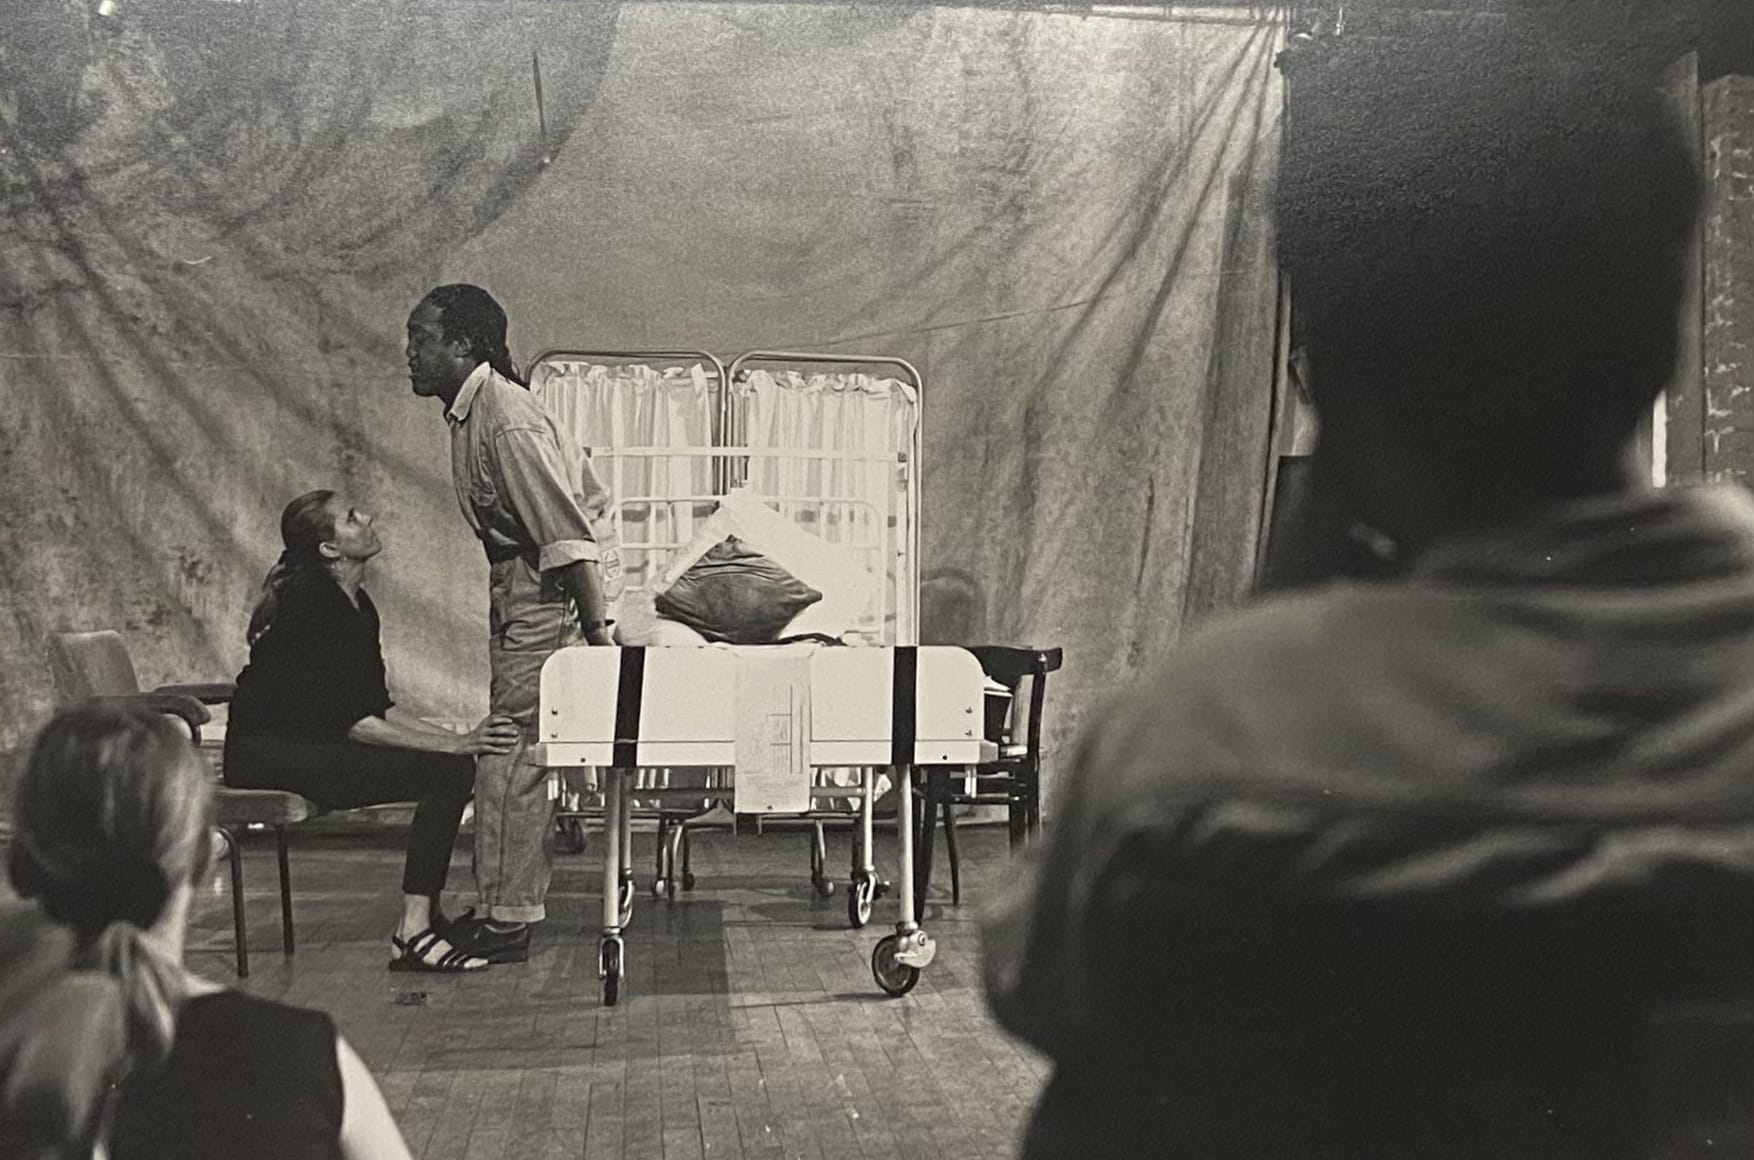 Two performers on a stage set as a hospital. One sits in a chair, holding the knees of the other, who is standing over them.